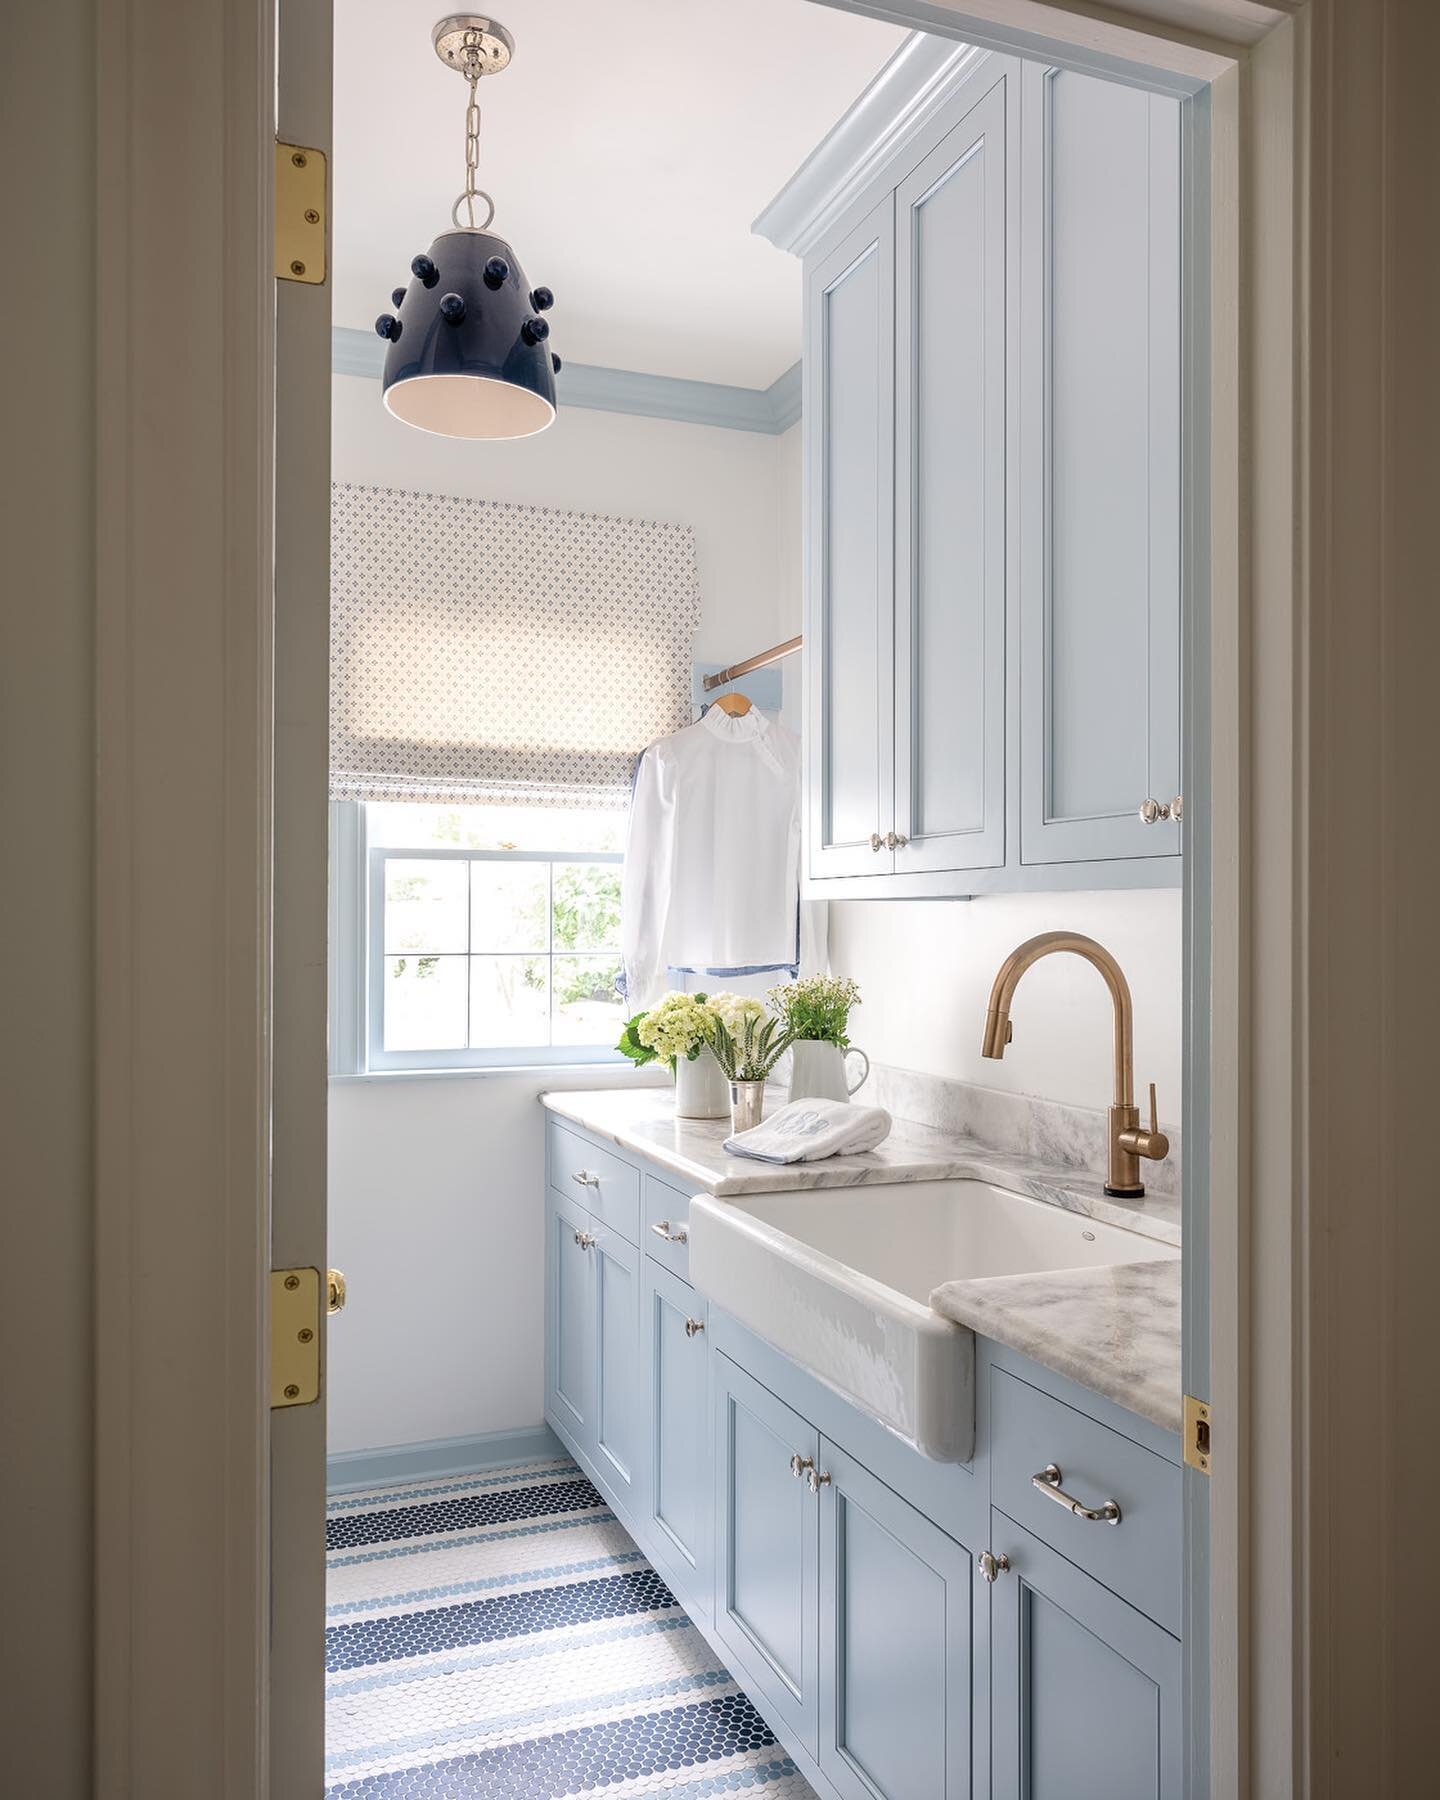 Recently we chatted with @elledecor about some fresh and fun laundry room ideas to elevate even the most mundane chore 🧺

As @katefiglerinteriors so beautifully puts it, &ldquo;just because a room is utilitarian in nature doesn&rsquo;t mean it can&r